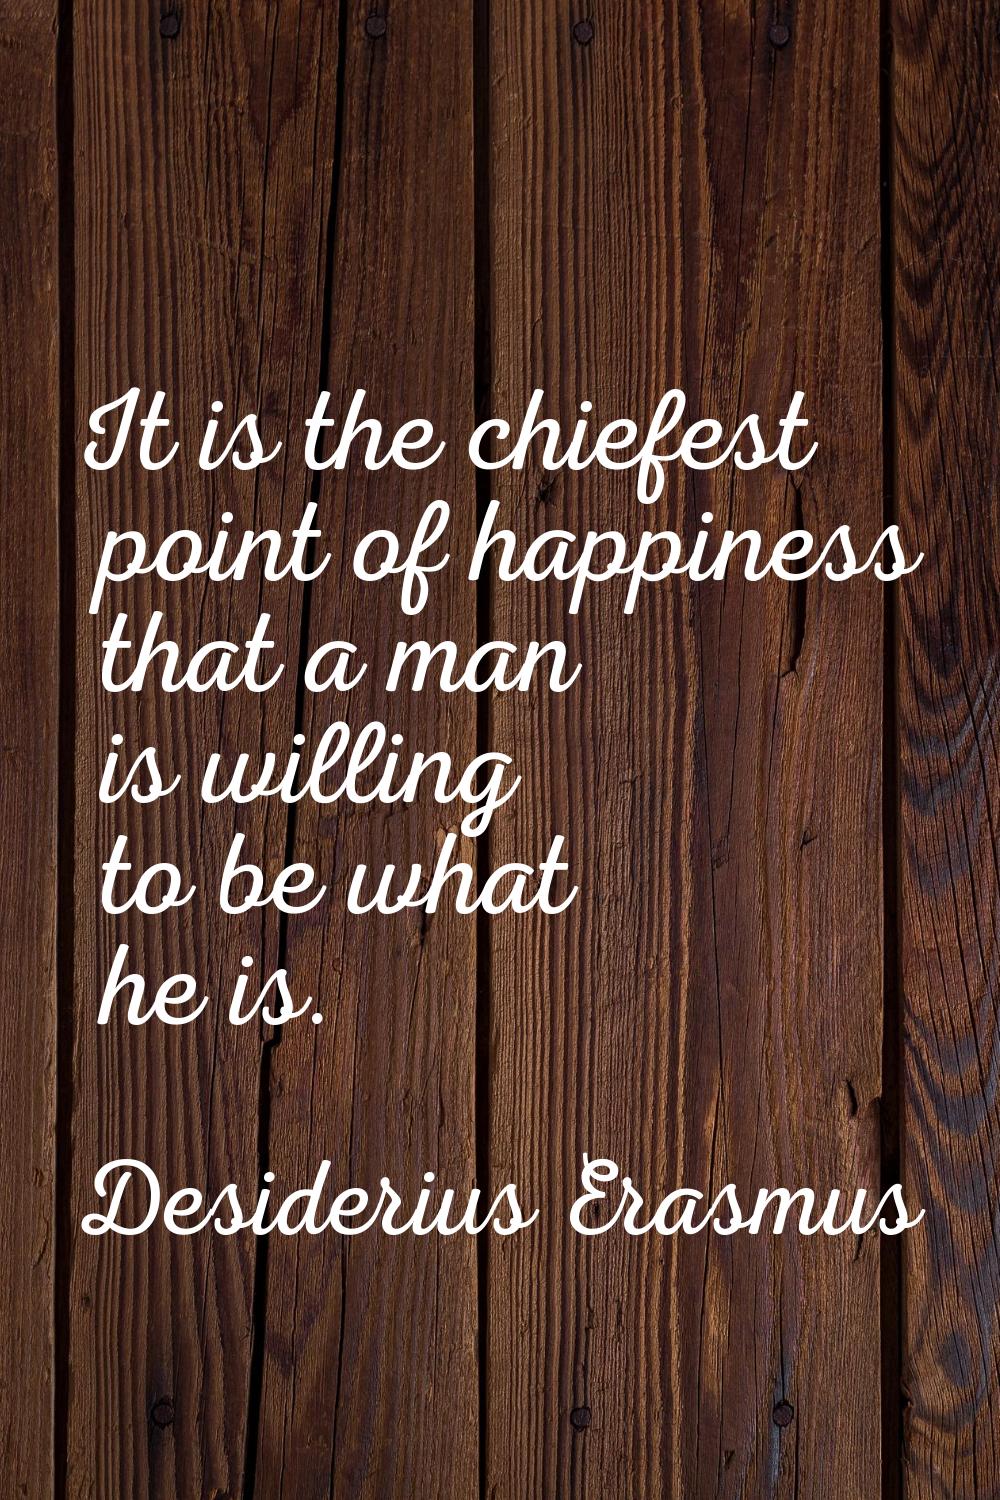 It is the chiefest point of happiness that a man is willing to be what he is.